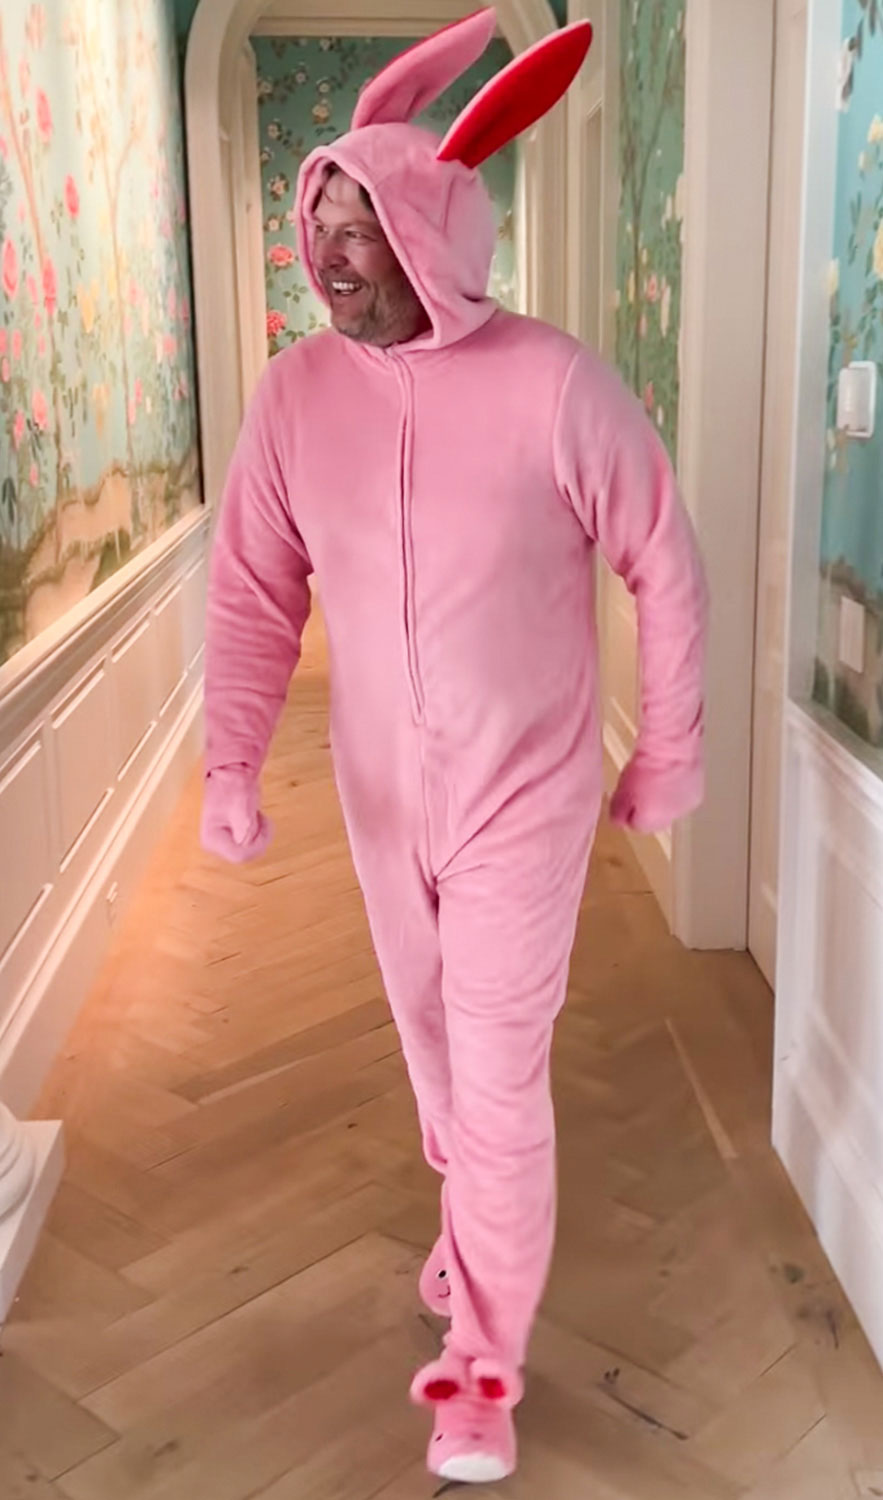 Blake Shelton transforms into a pink bunny for Easter celebrations with Gwen Stefani